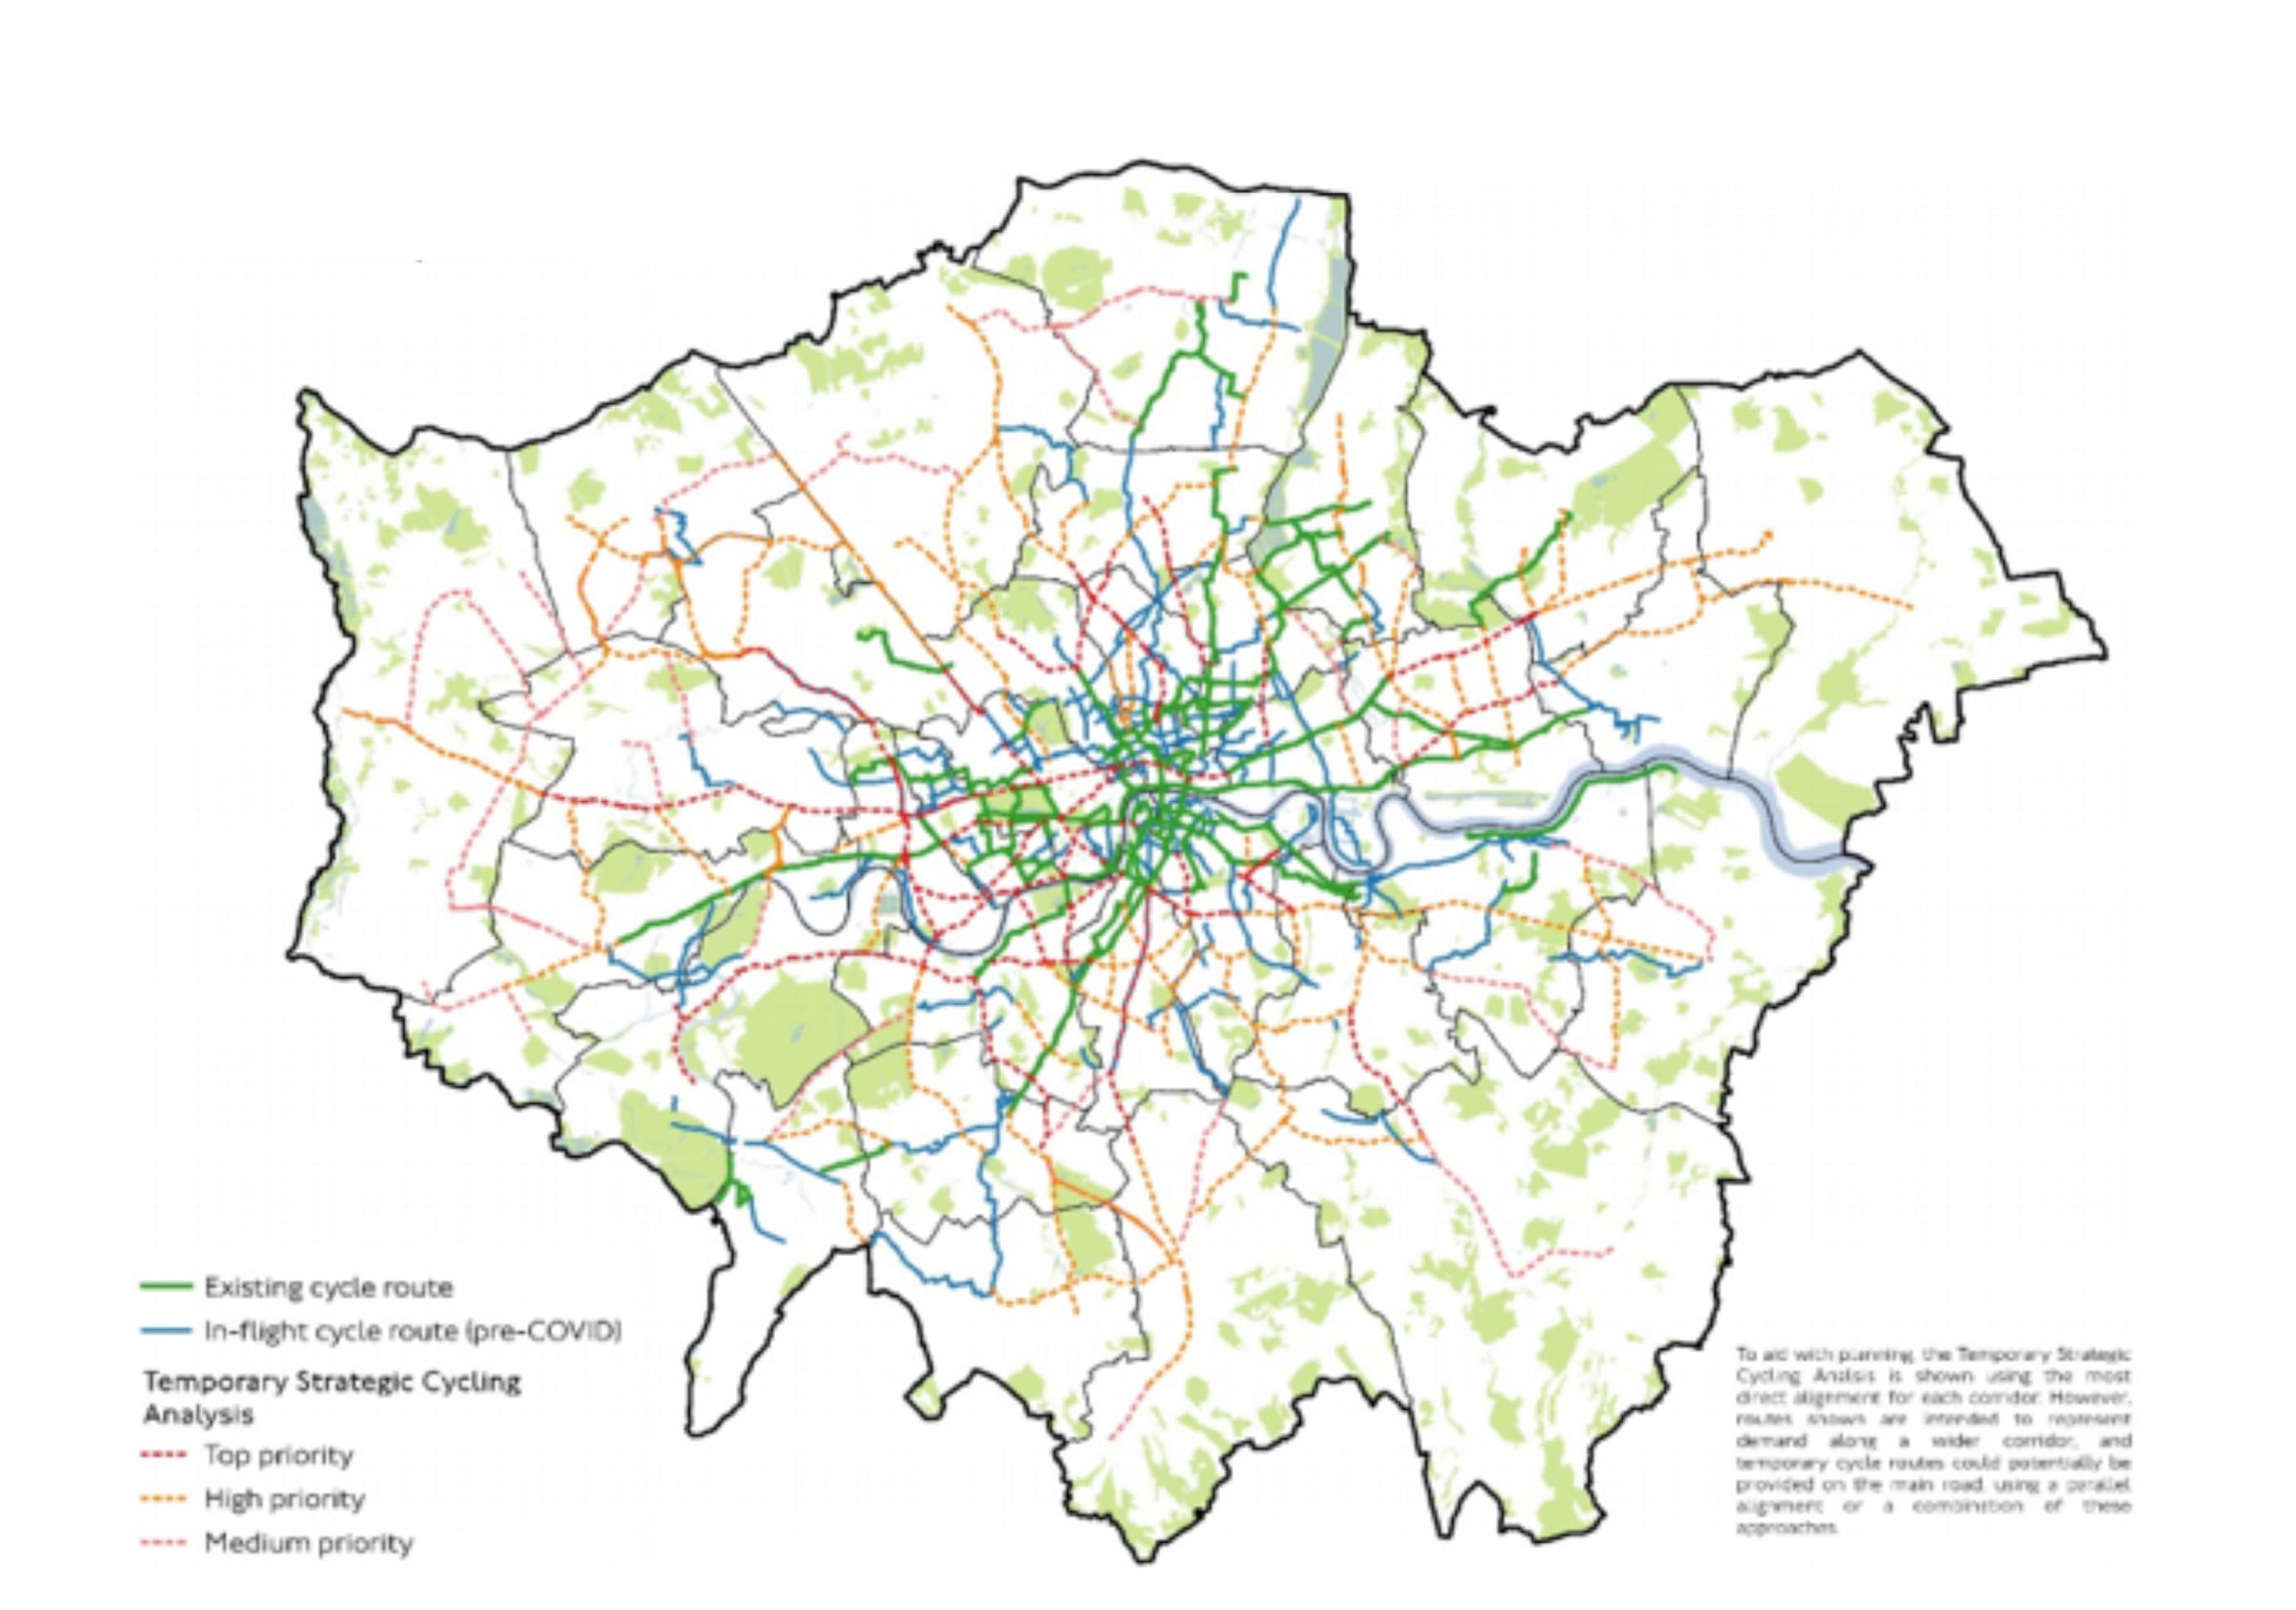 Figure 1: Temporary Strategic Cycling Analysis Source for the Street Space Plan: Transport for London